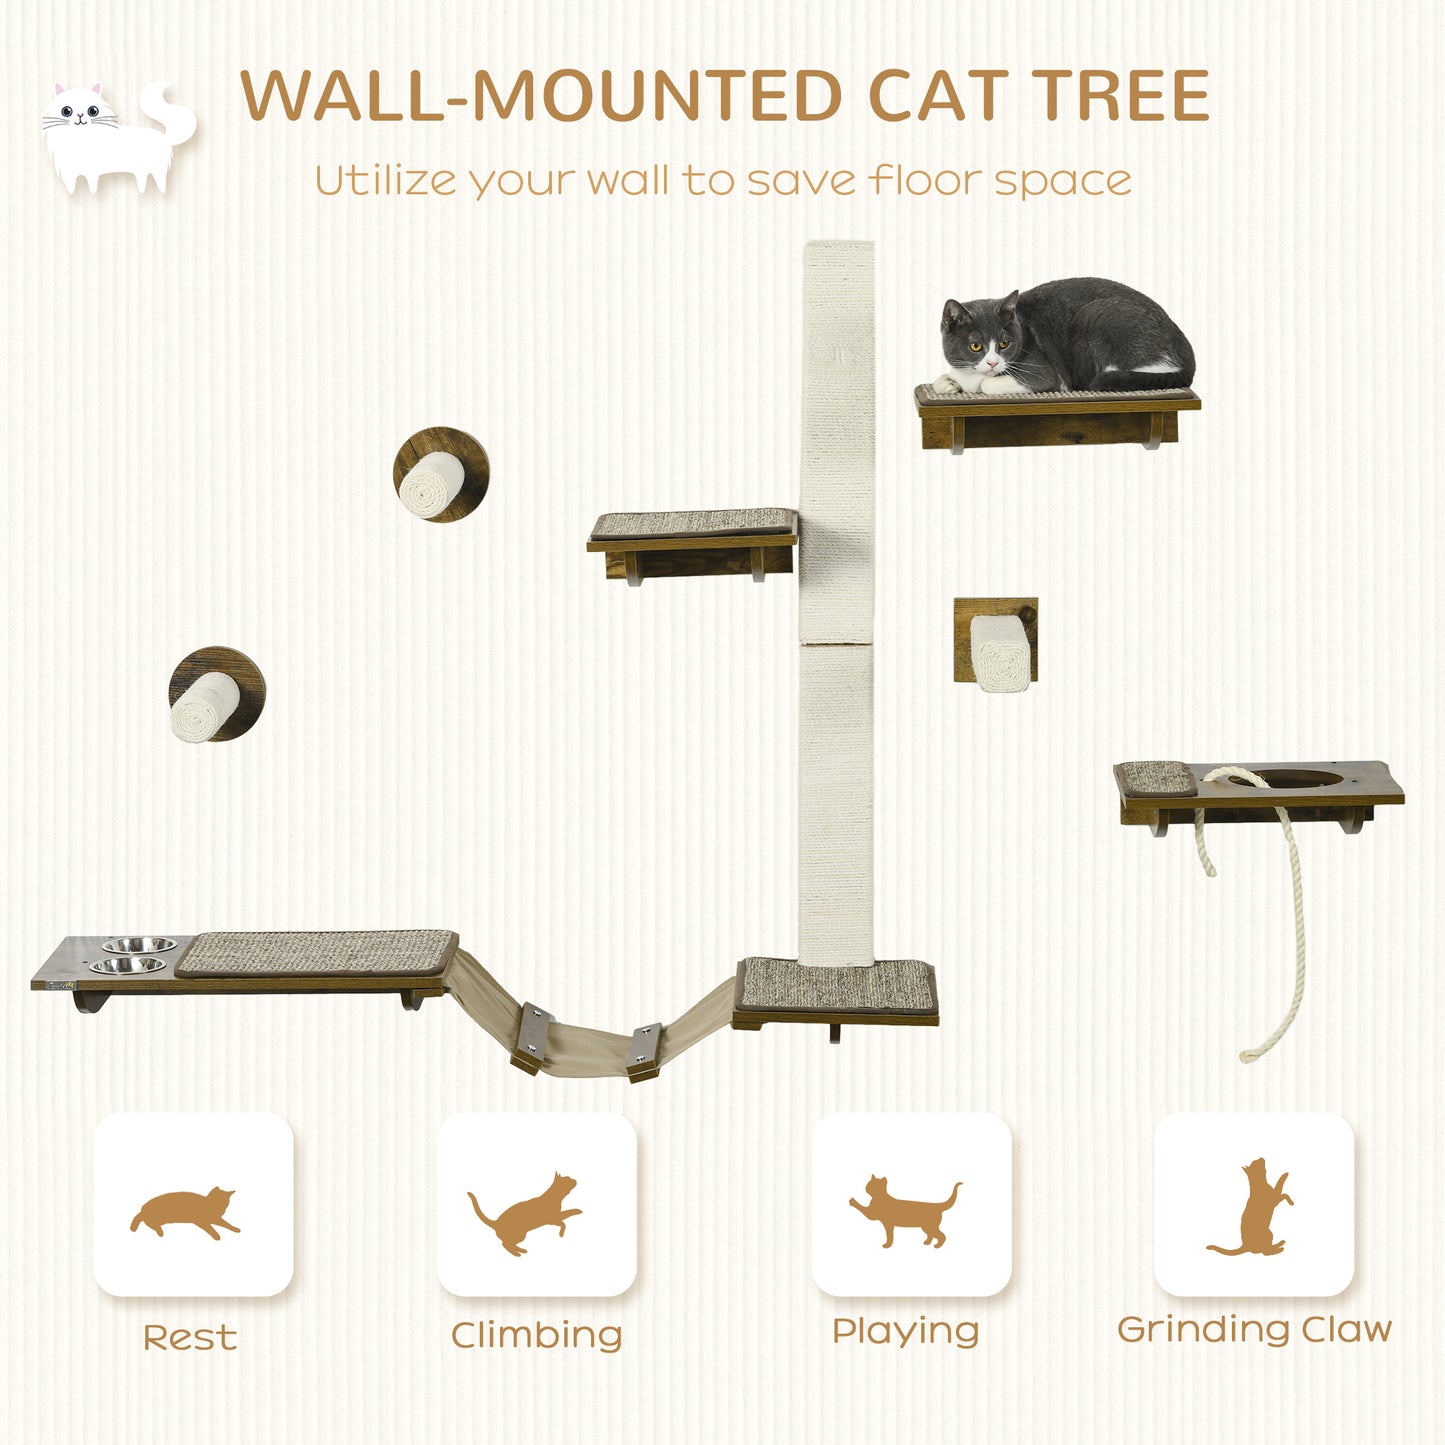 PawHut Cat Wall Shelves, Cat Wall Furniture with Perches, Scratching Posts, Ladder, Feeder Bowls, 8 Piece Wall Mounted Cat Shelves for Climbing, Sleeping, Playing, Brown